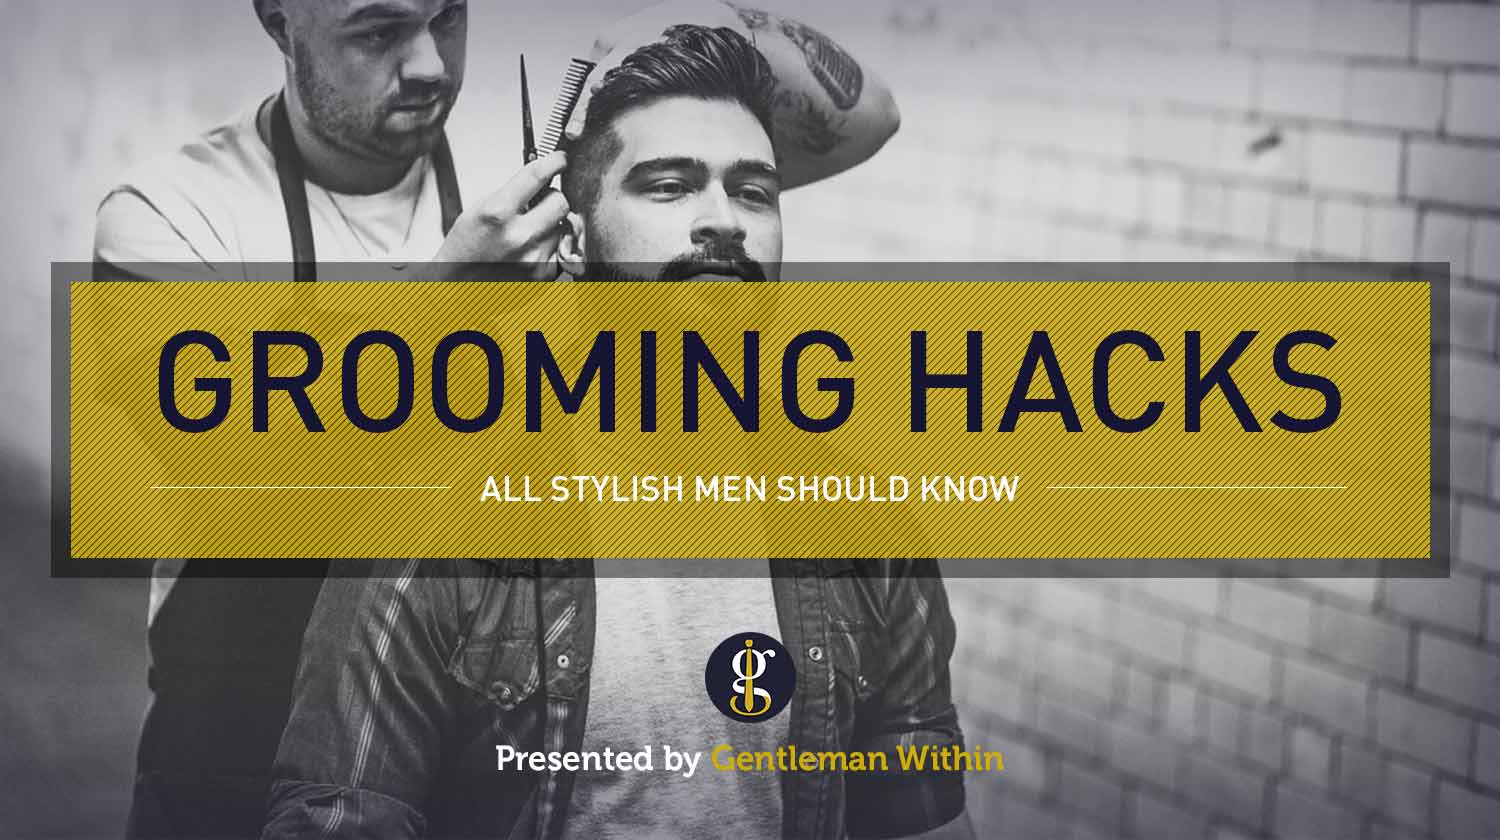 10 Grooming Hacks All Stylish Men Should Know | GENTLEMAN WITHIN